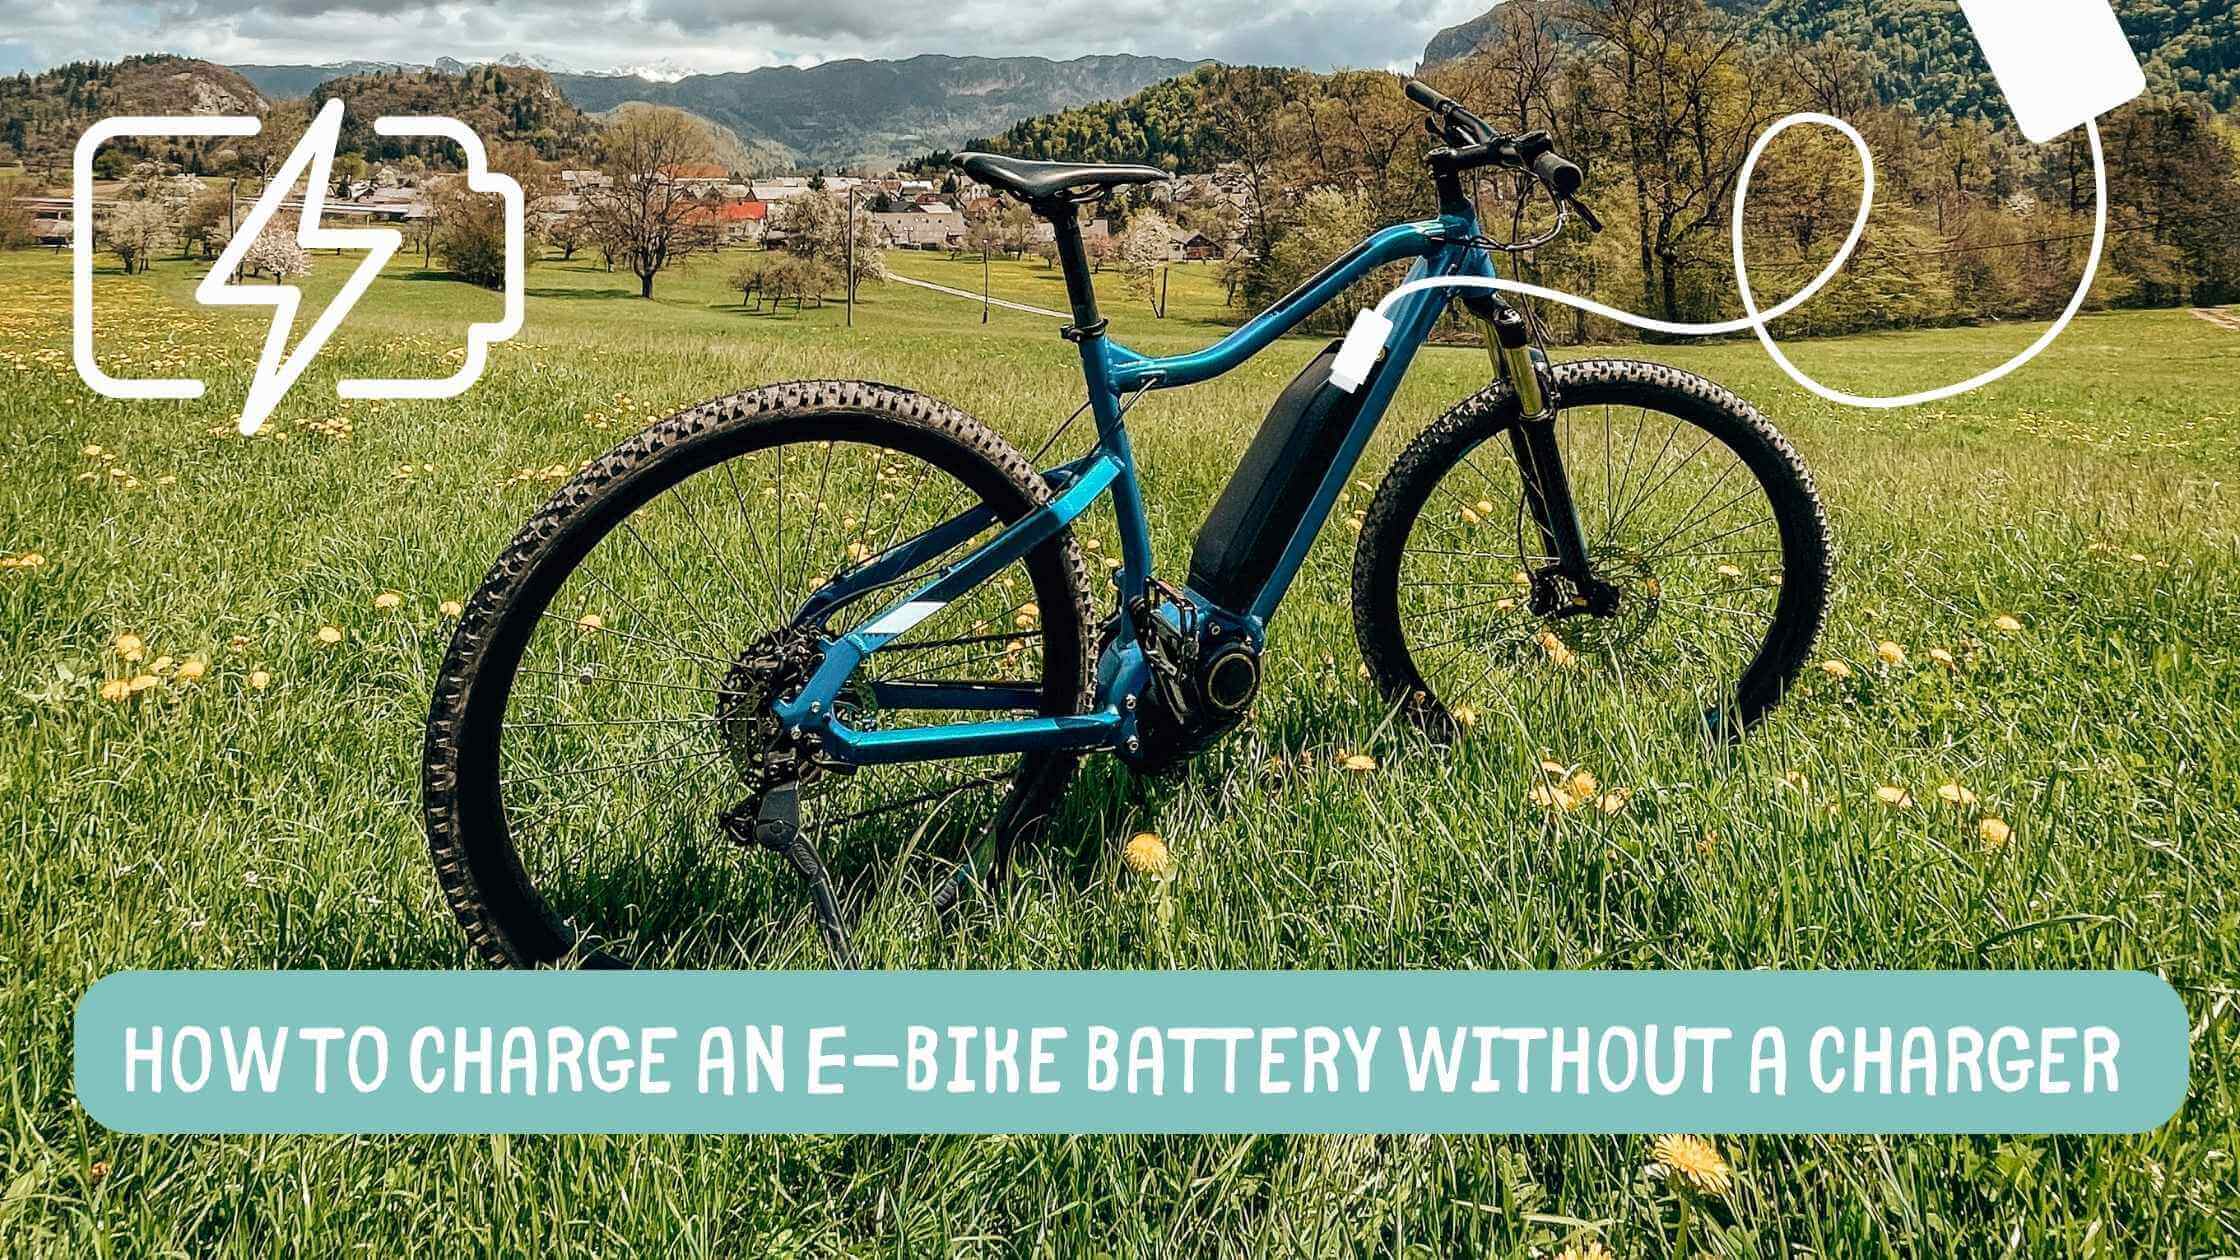 How to Charge an E-bike Battery Without a Charger